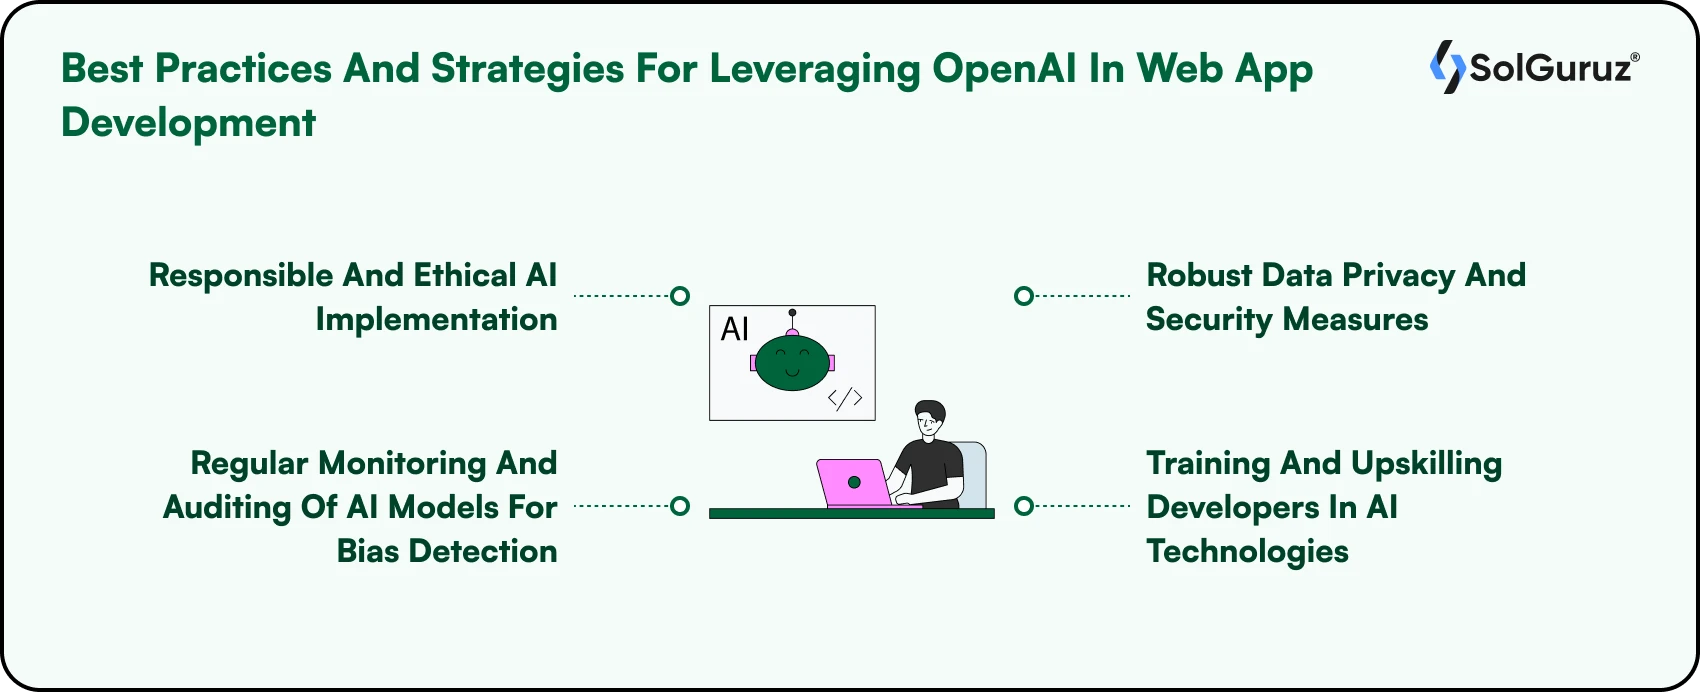 Best Practices And Strategies For Leveraging OpenAI In Web App Development